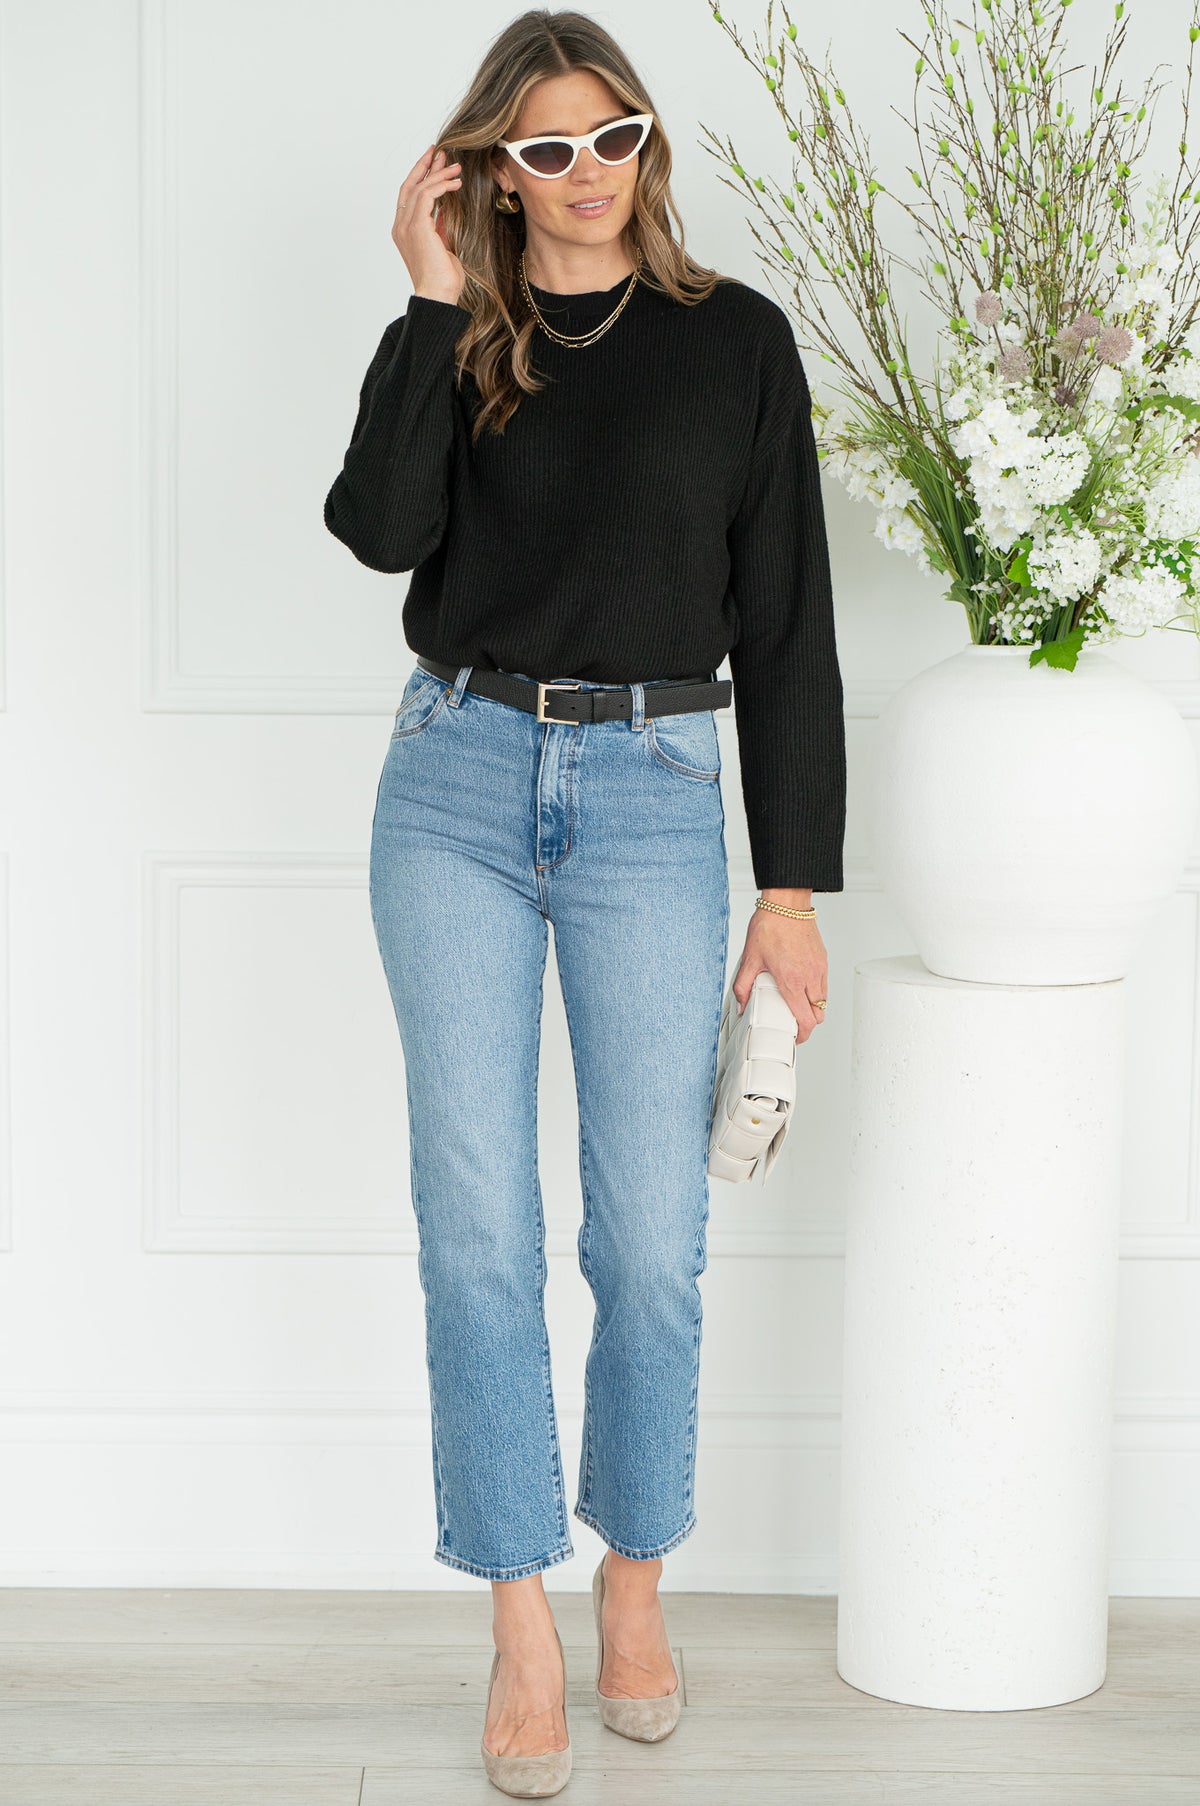 SCULLY SOFT SWEATER-BK